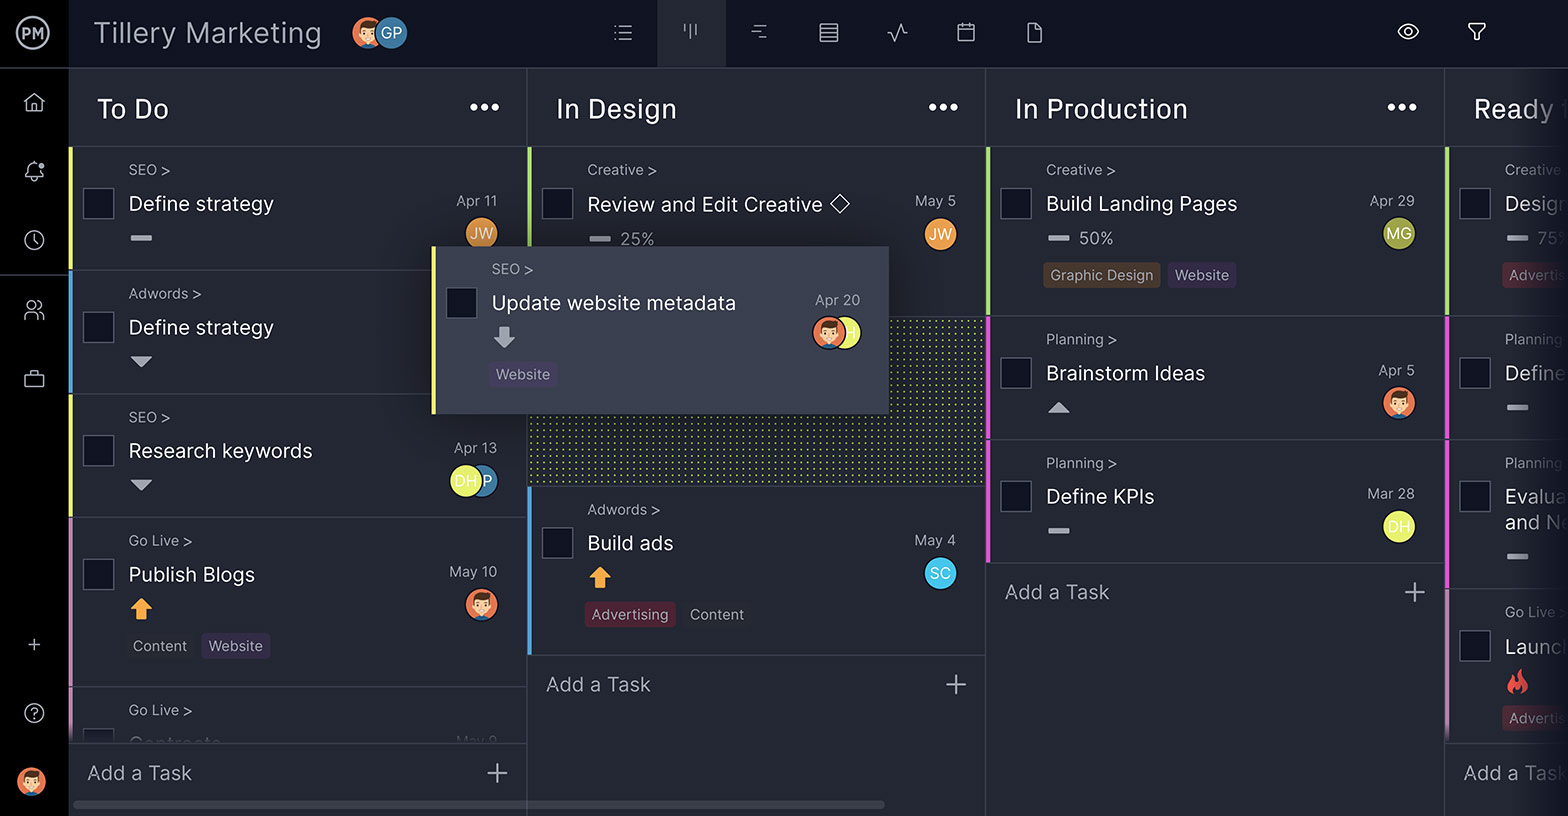 ProjectManager's Kanban board, an alternative to project management charts